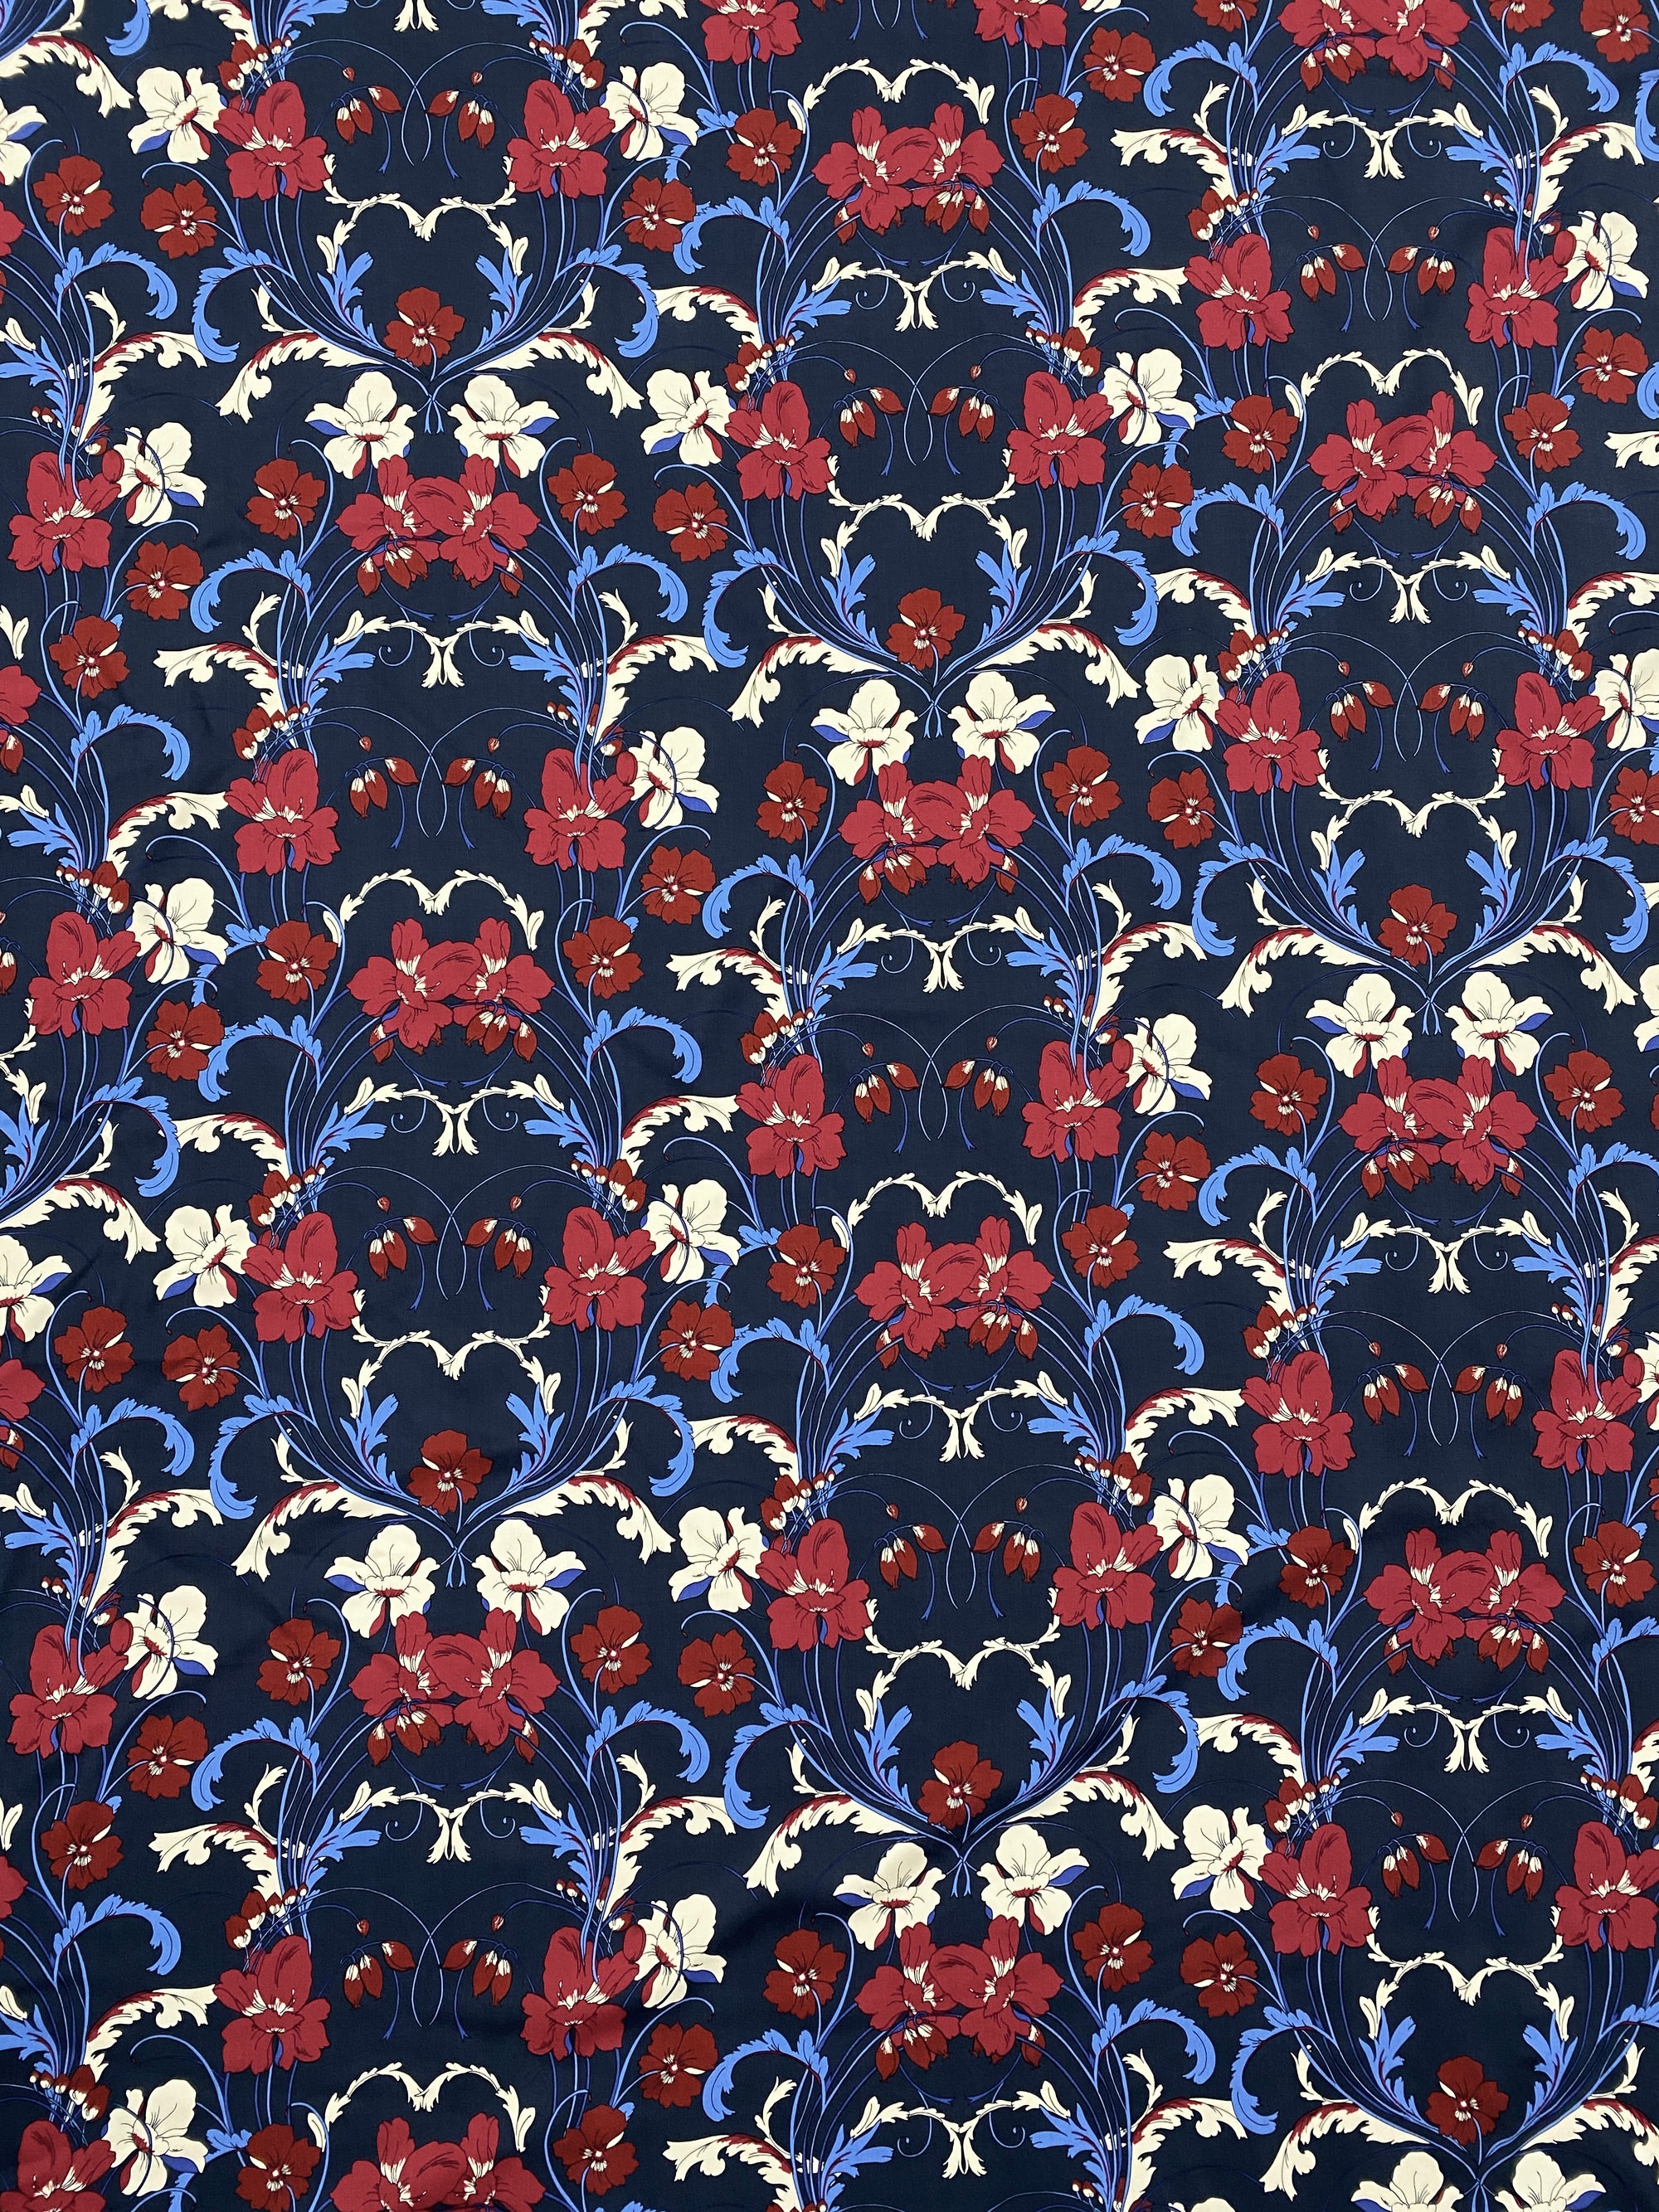 Viscose Challis - White and Red Poppies